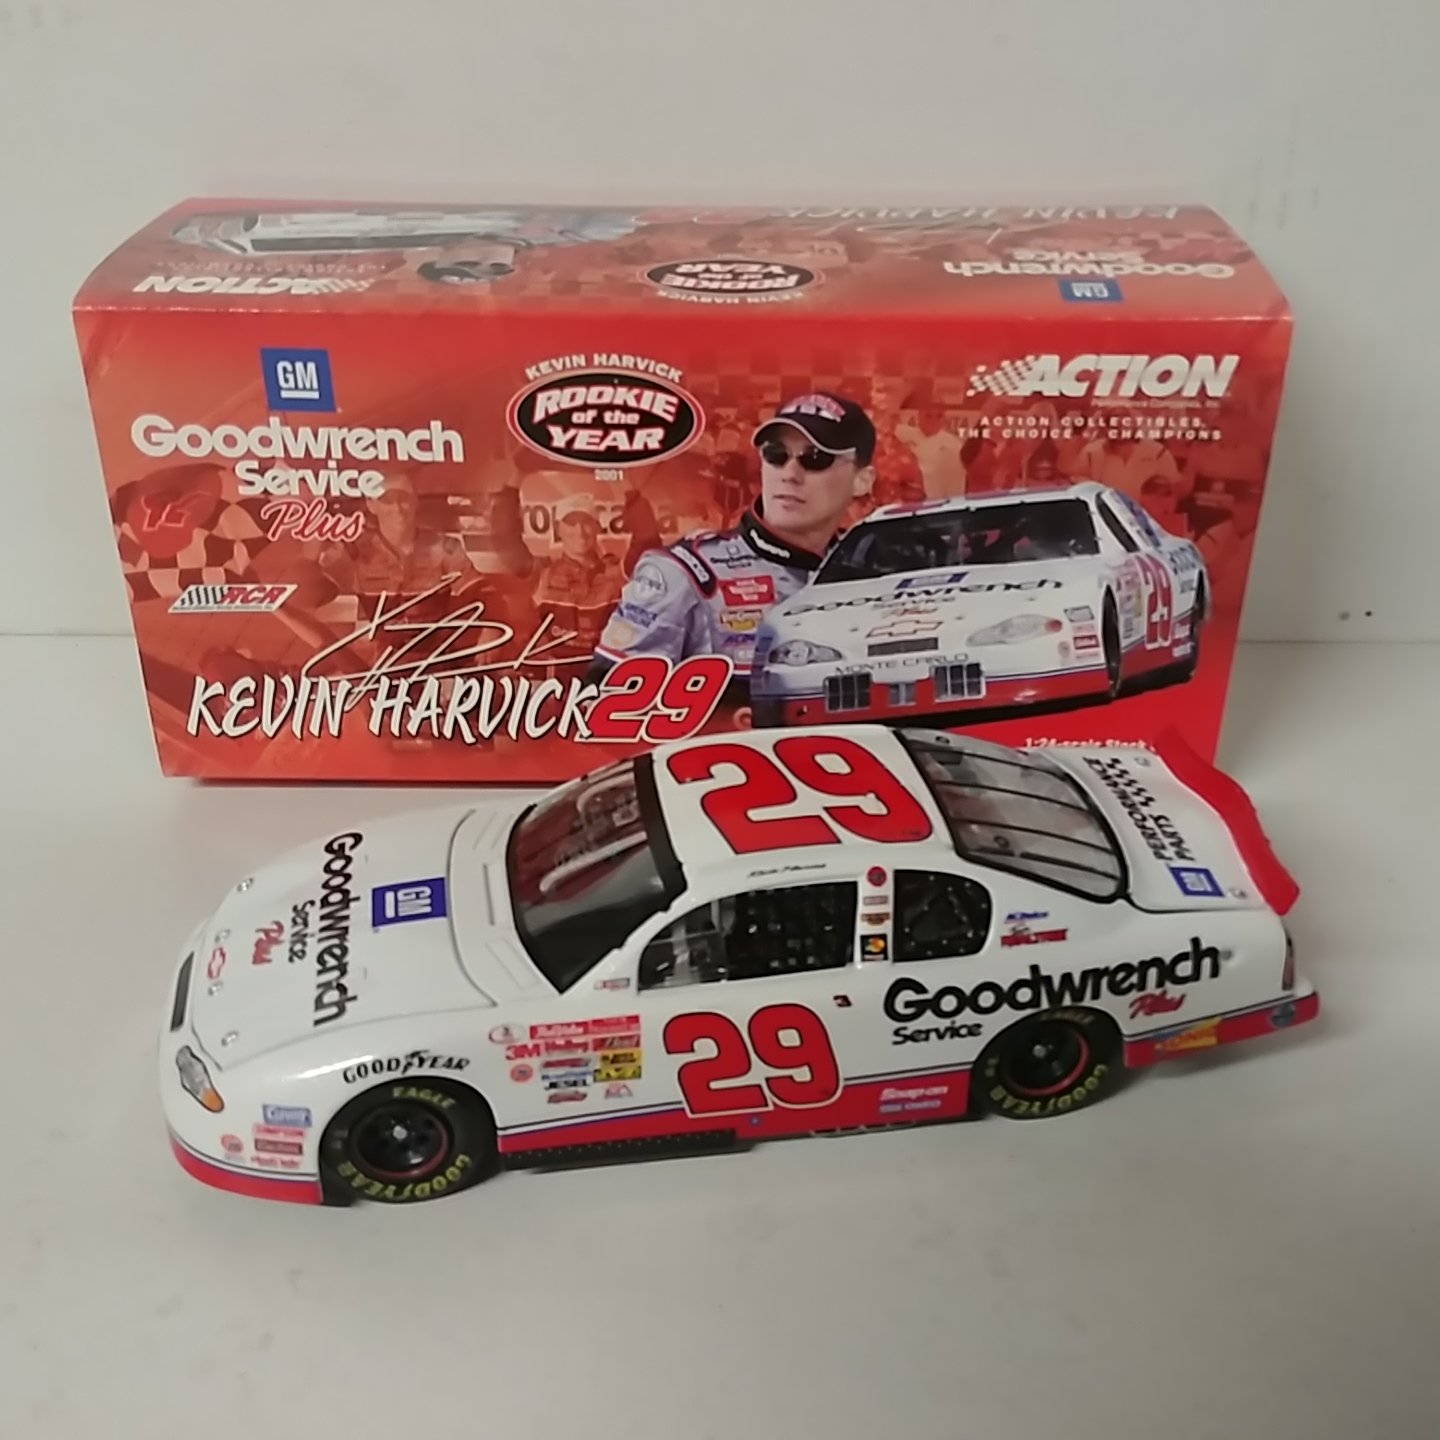 2001 Kevin Harvick 1/24th Goodwrench "Rookie of the Year" c/w car